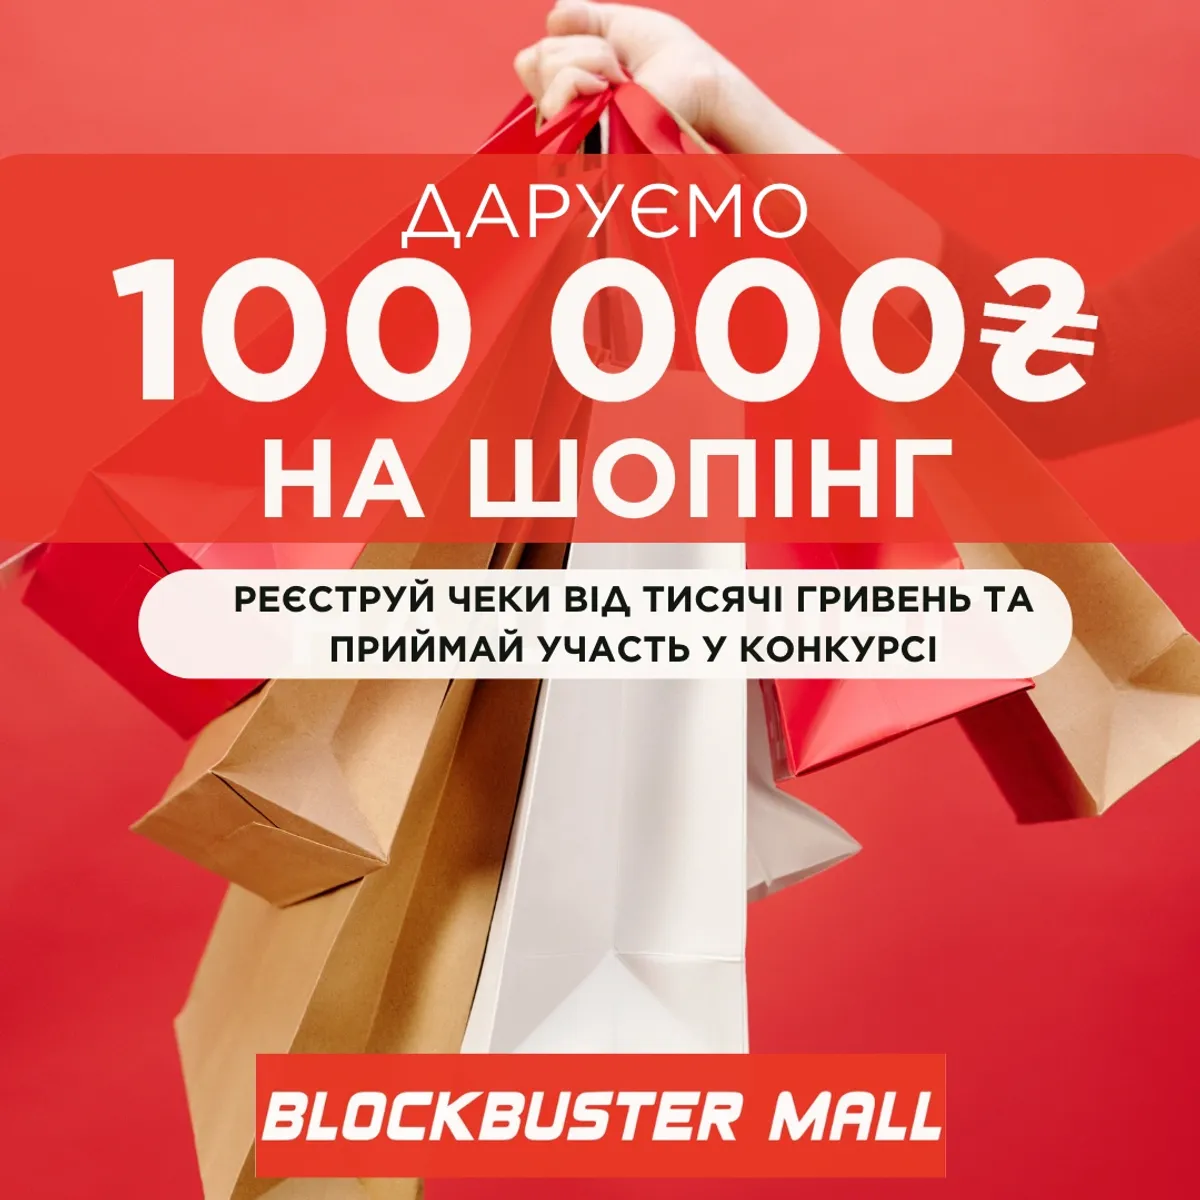 We give 100,000 UAH for shopping for shopping ❤️